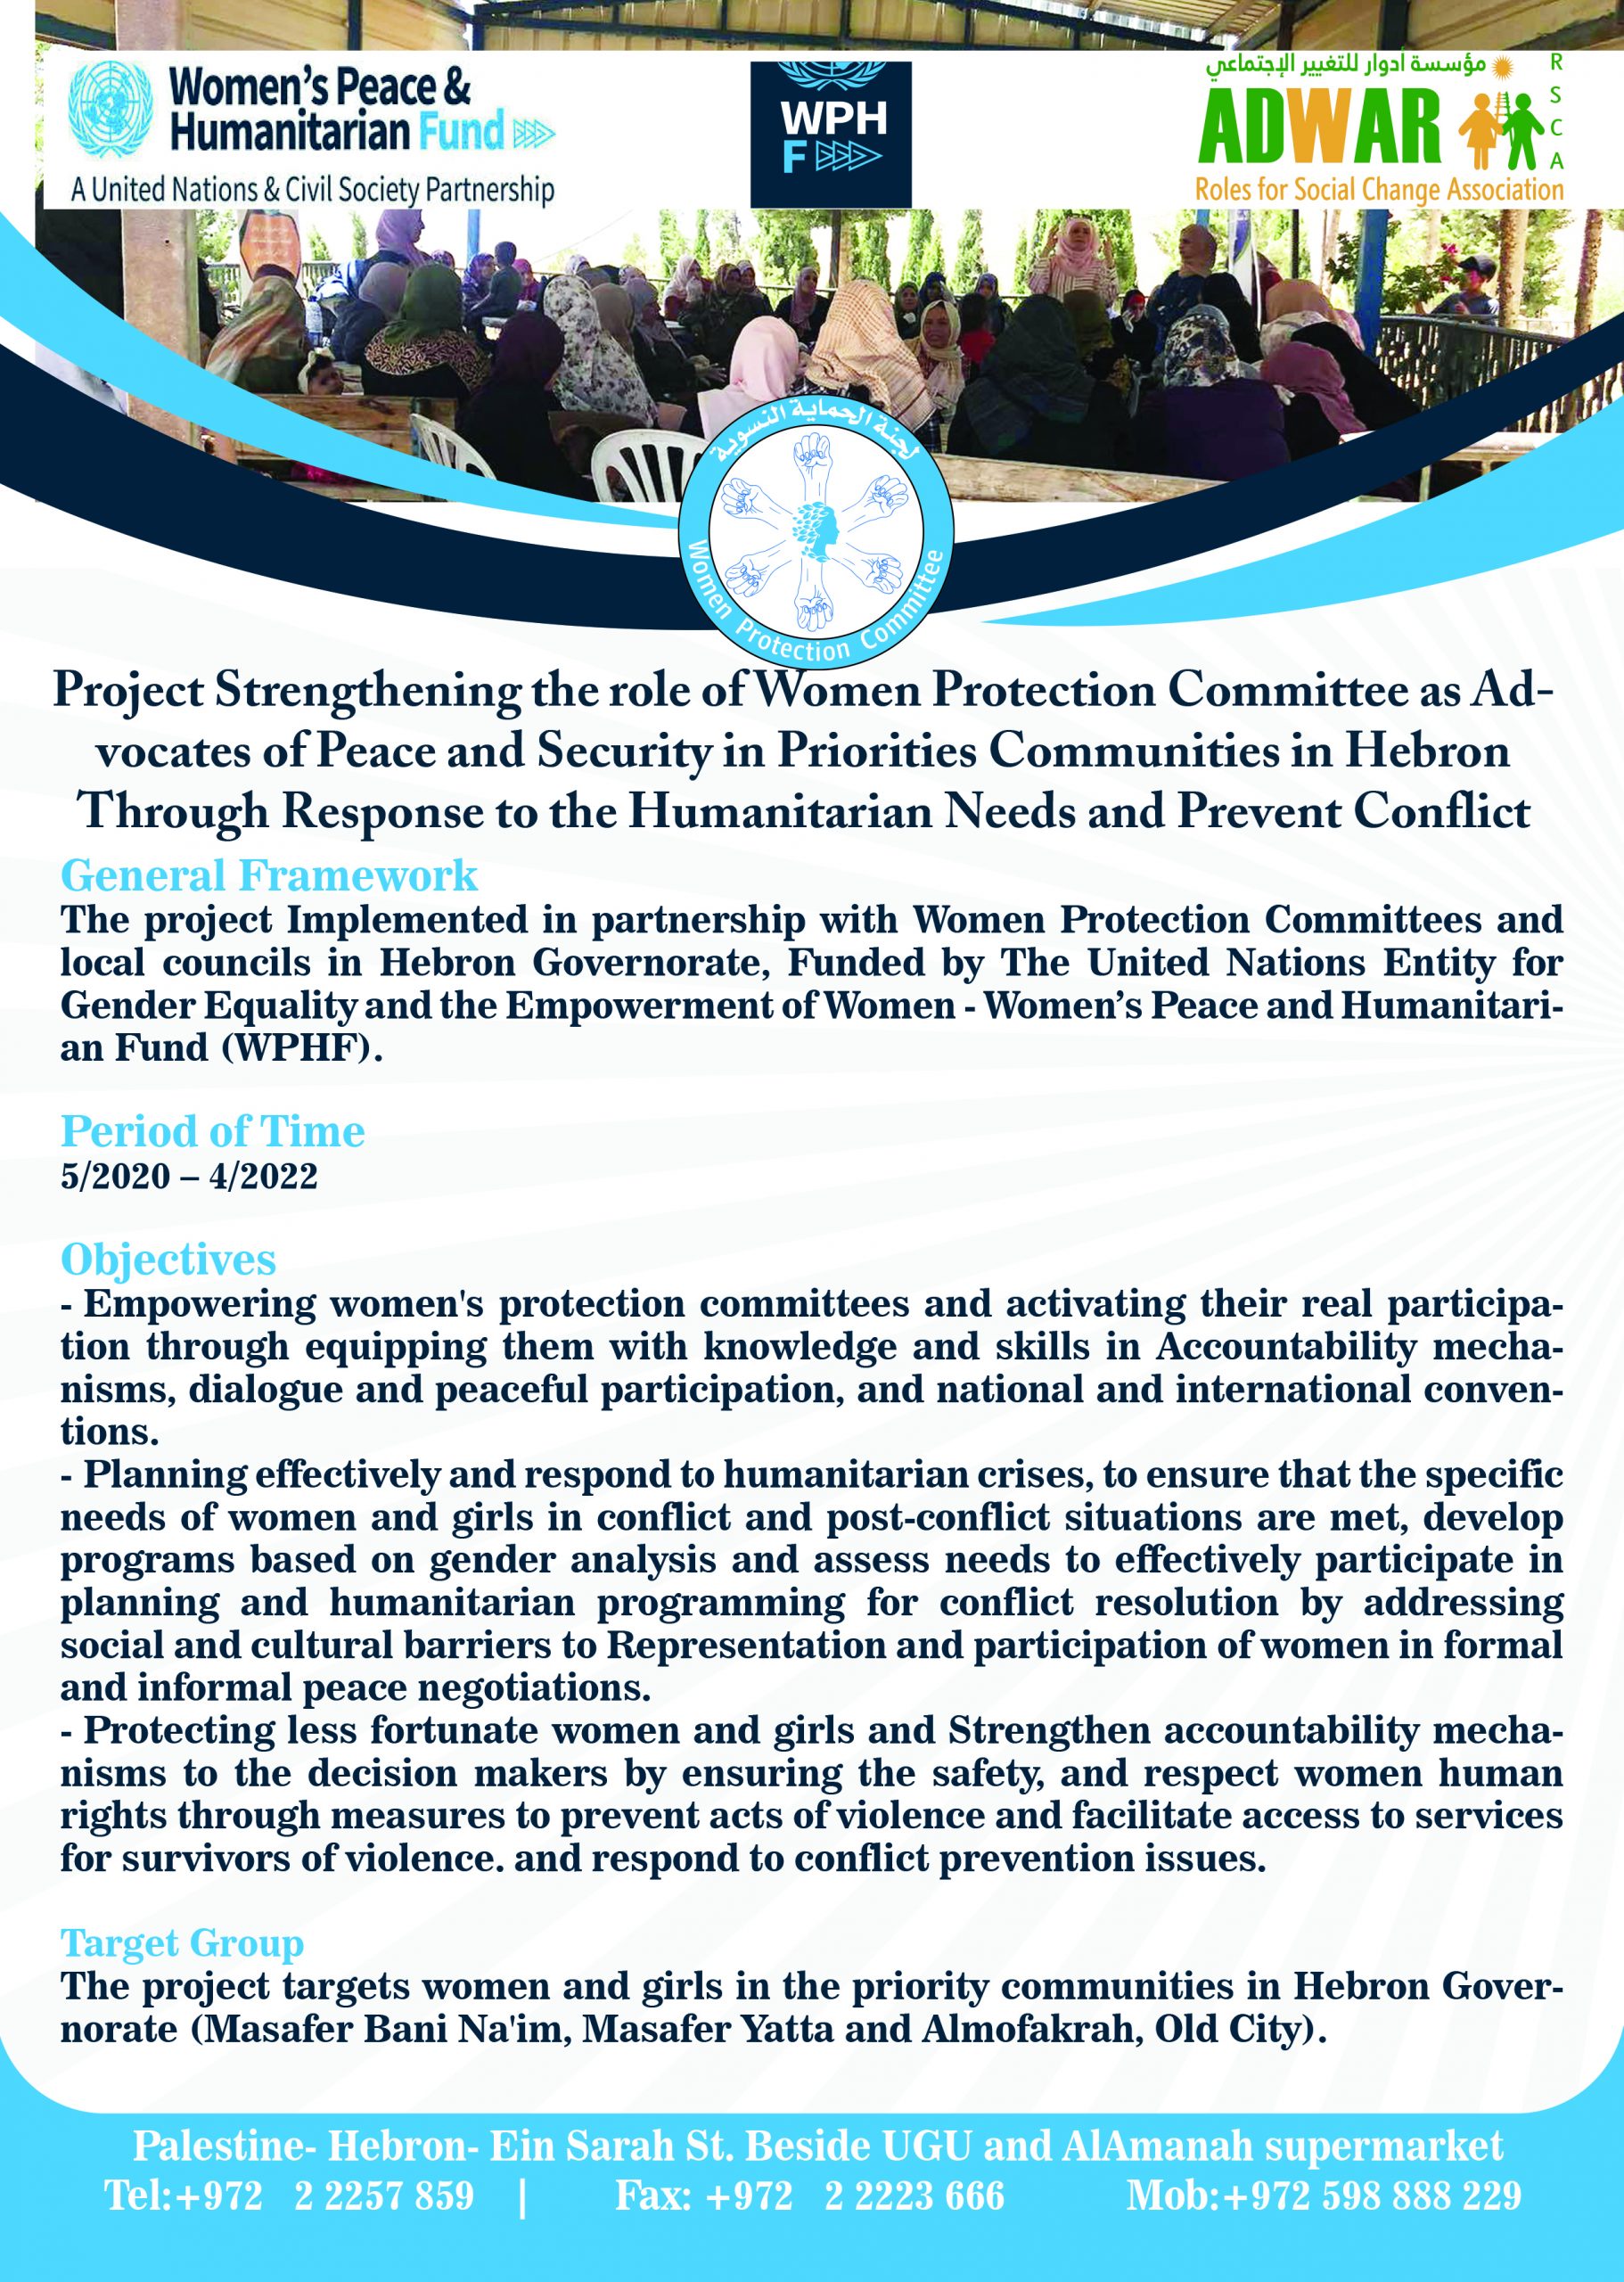  Project Strengthening the role of Women Protection Committee as Ad-vocates of Peace and Security